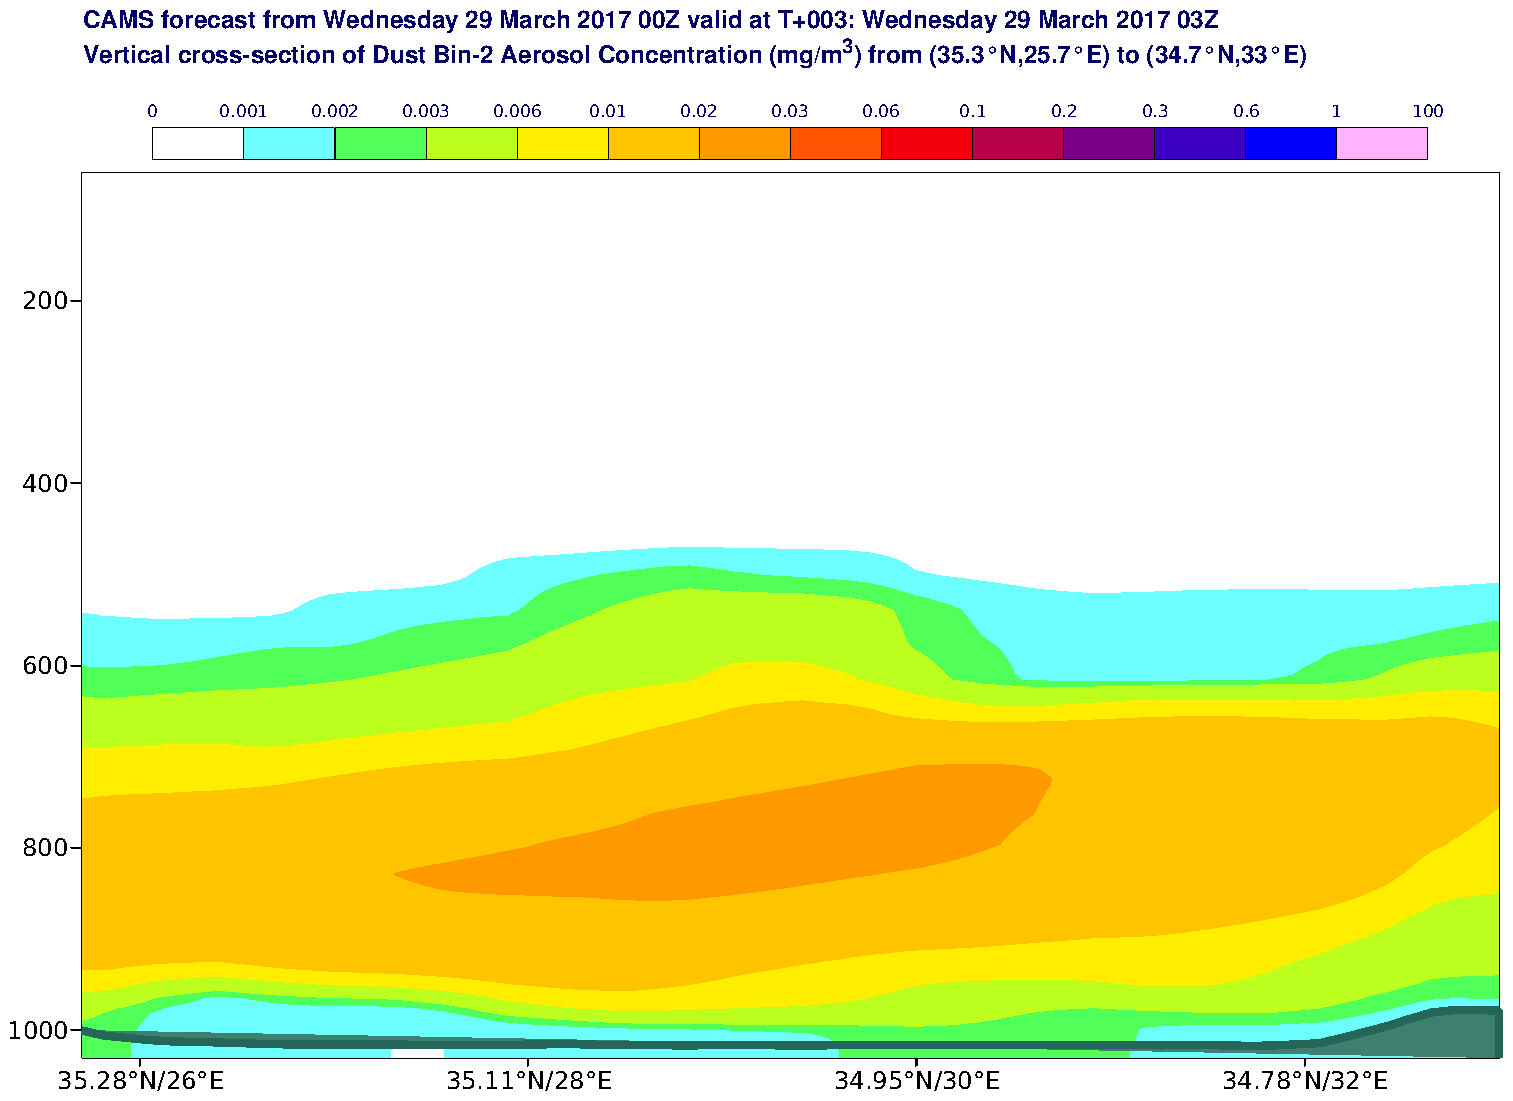 Vertical cross-section of Dust Bin-2 Aerosol Concentration (mg/m3) valid at T3 - 2017-03-29 03:00